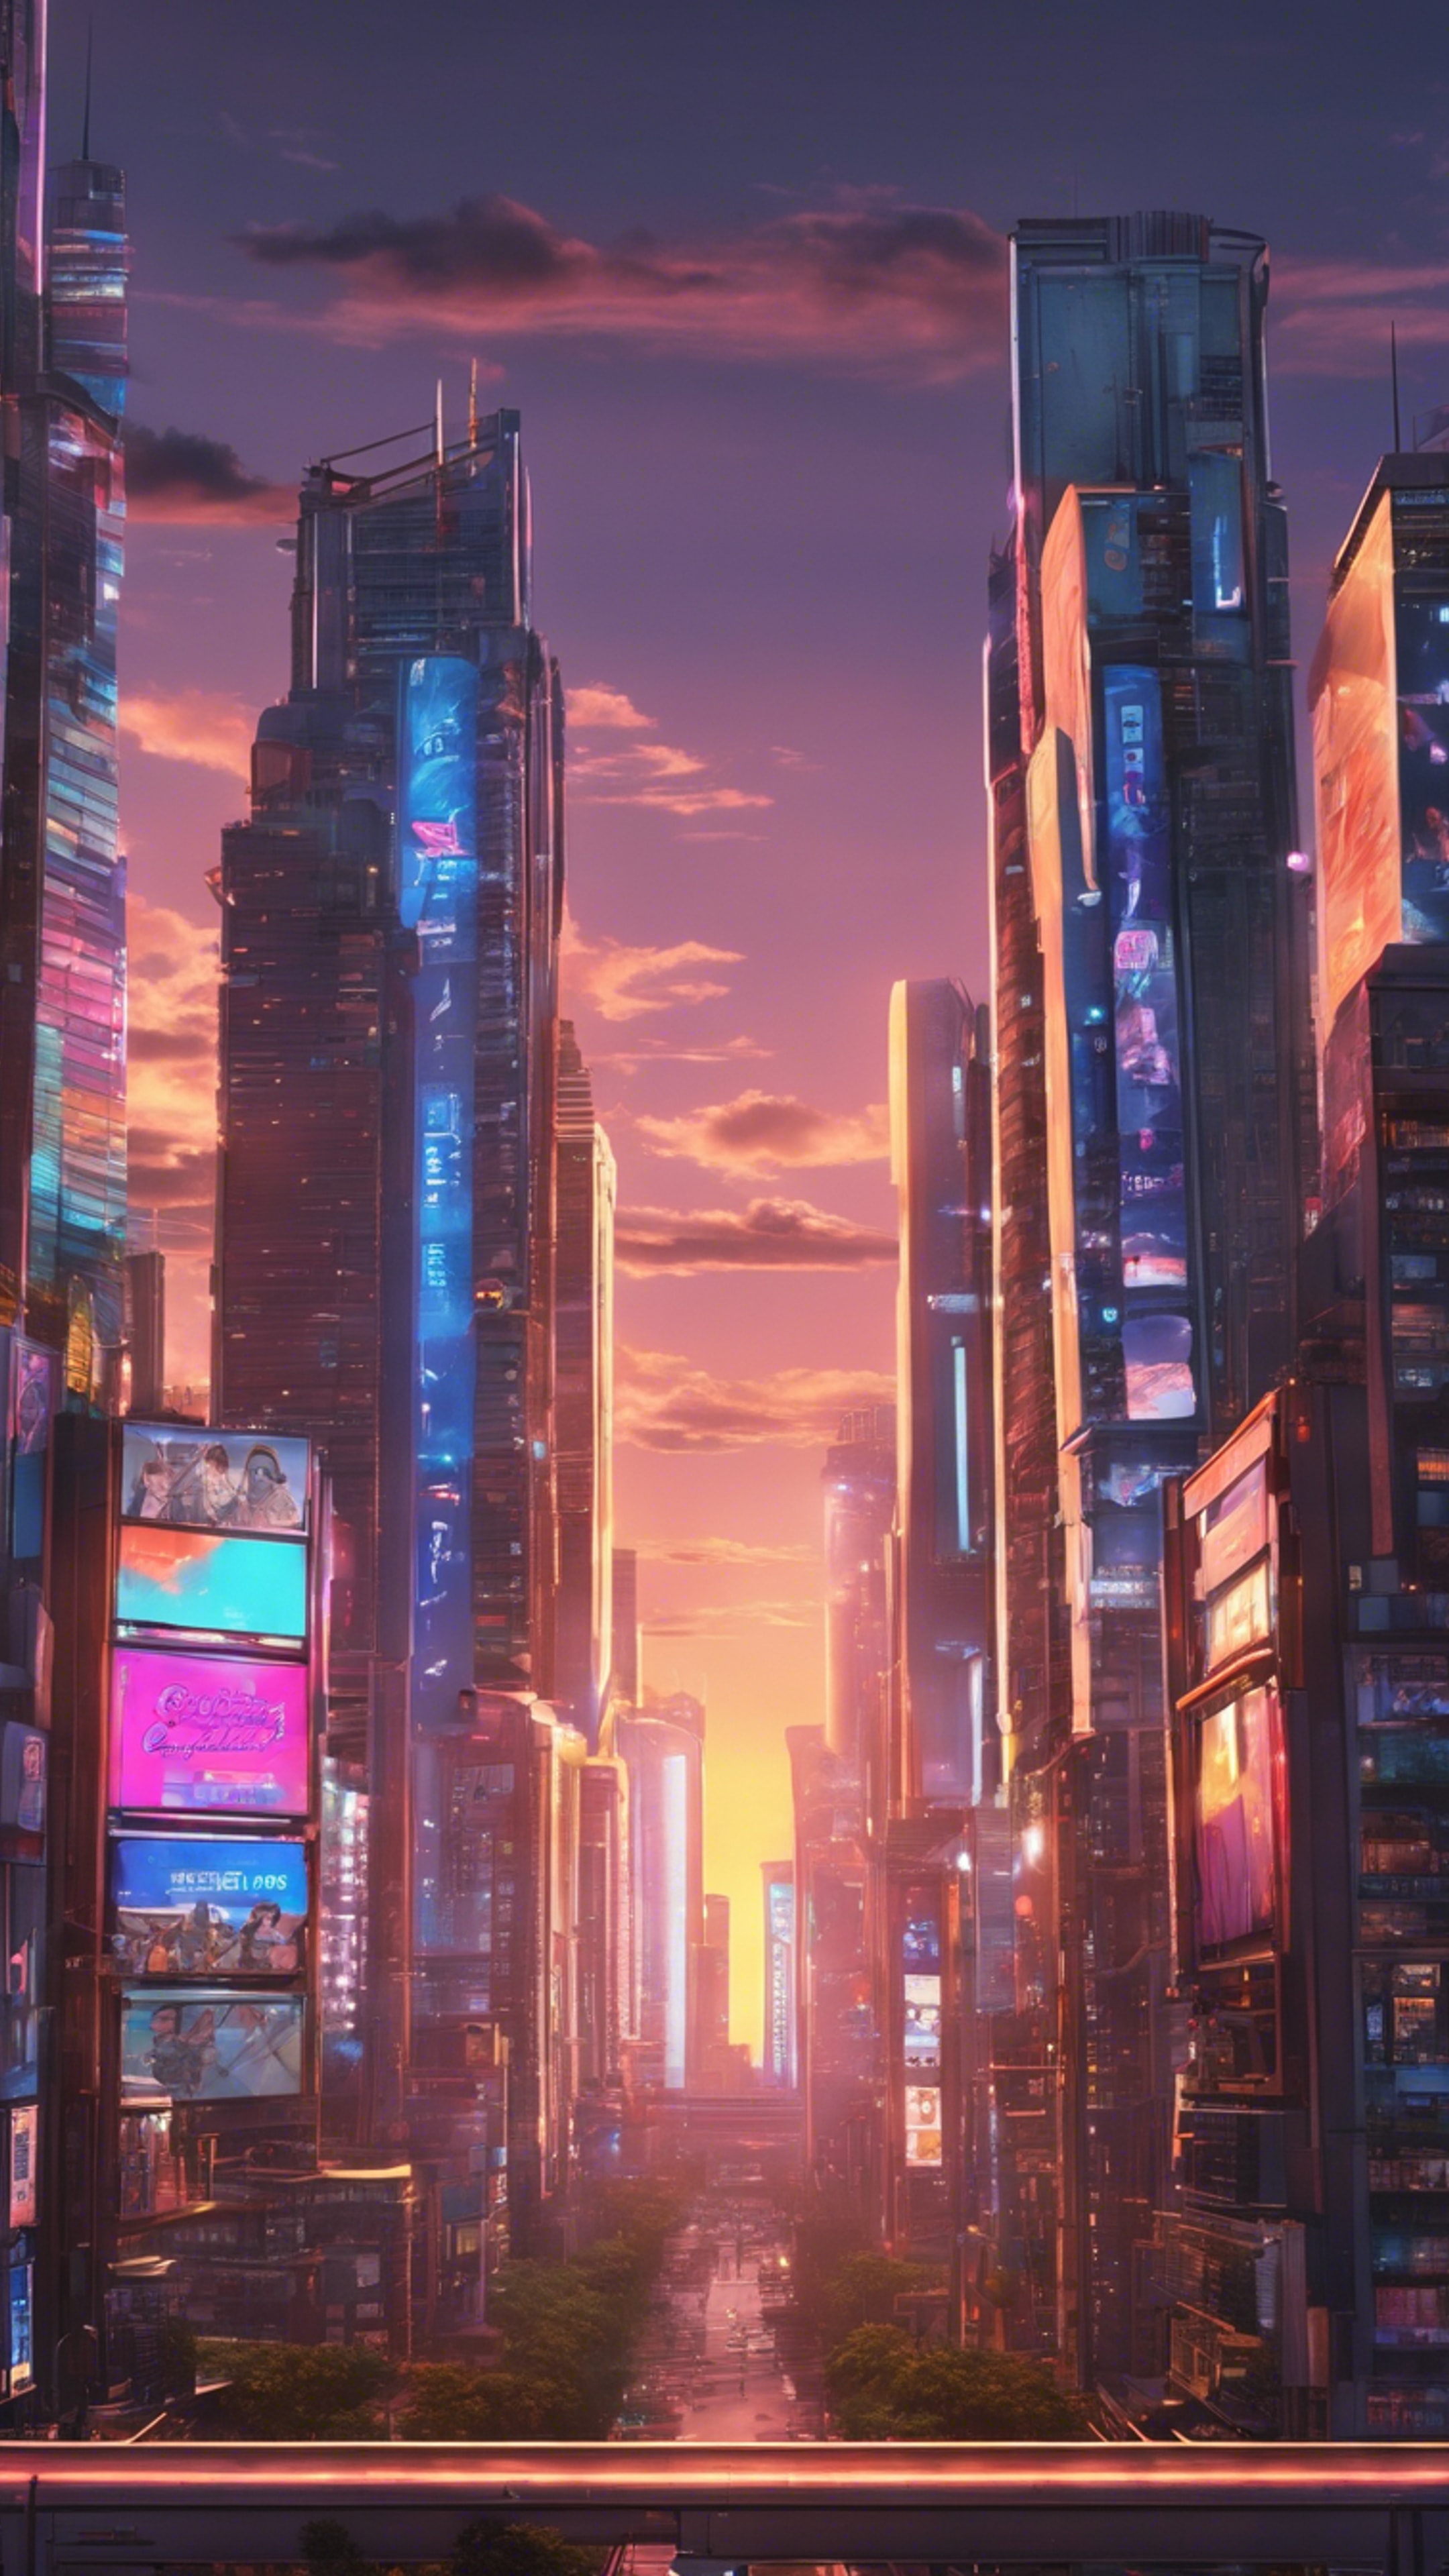 A cool anime-themed cityscape at sunset with towering skyscrapers and glowing neon billboards. Hintergrund[63ed83801d984cce89ed]